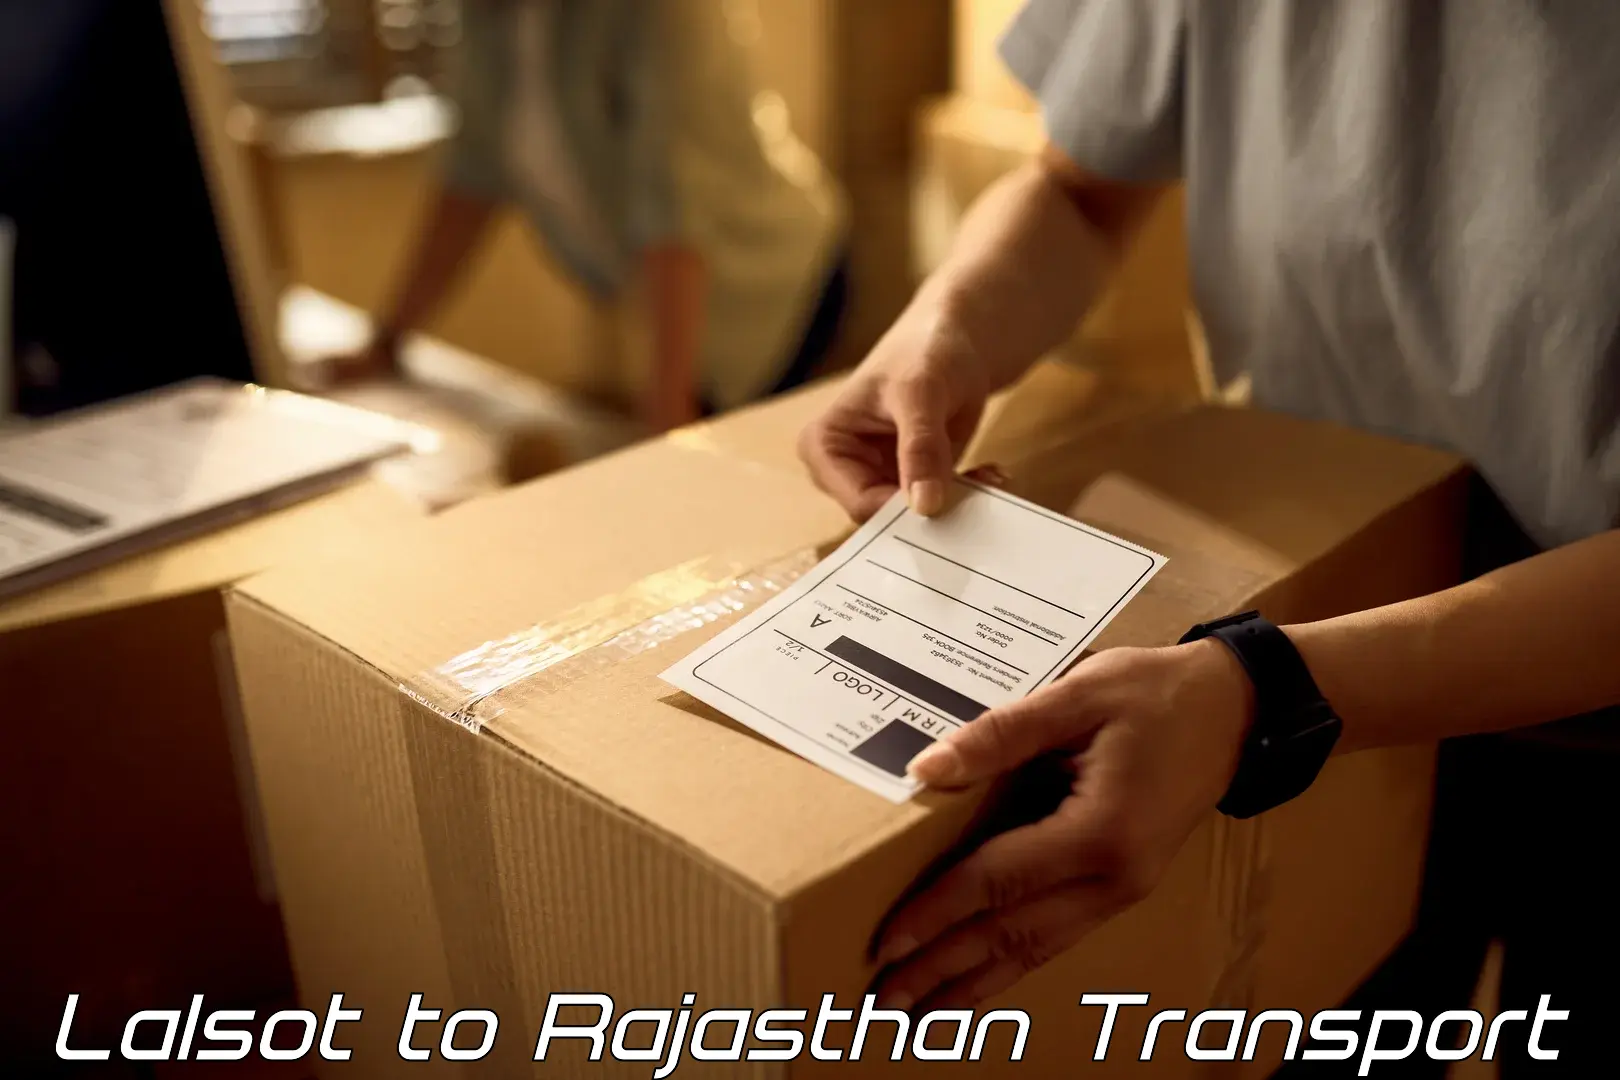 Goods delivery service Lalsot to Rajasthan